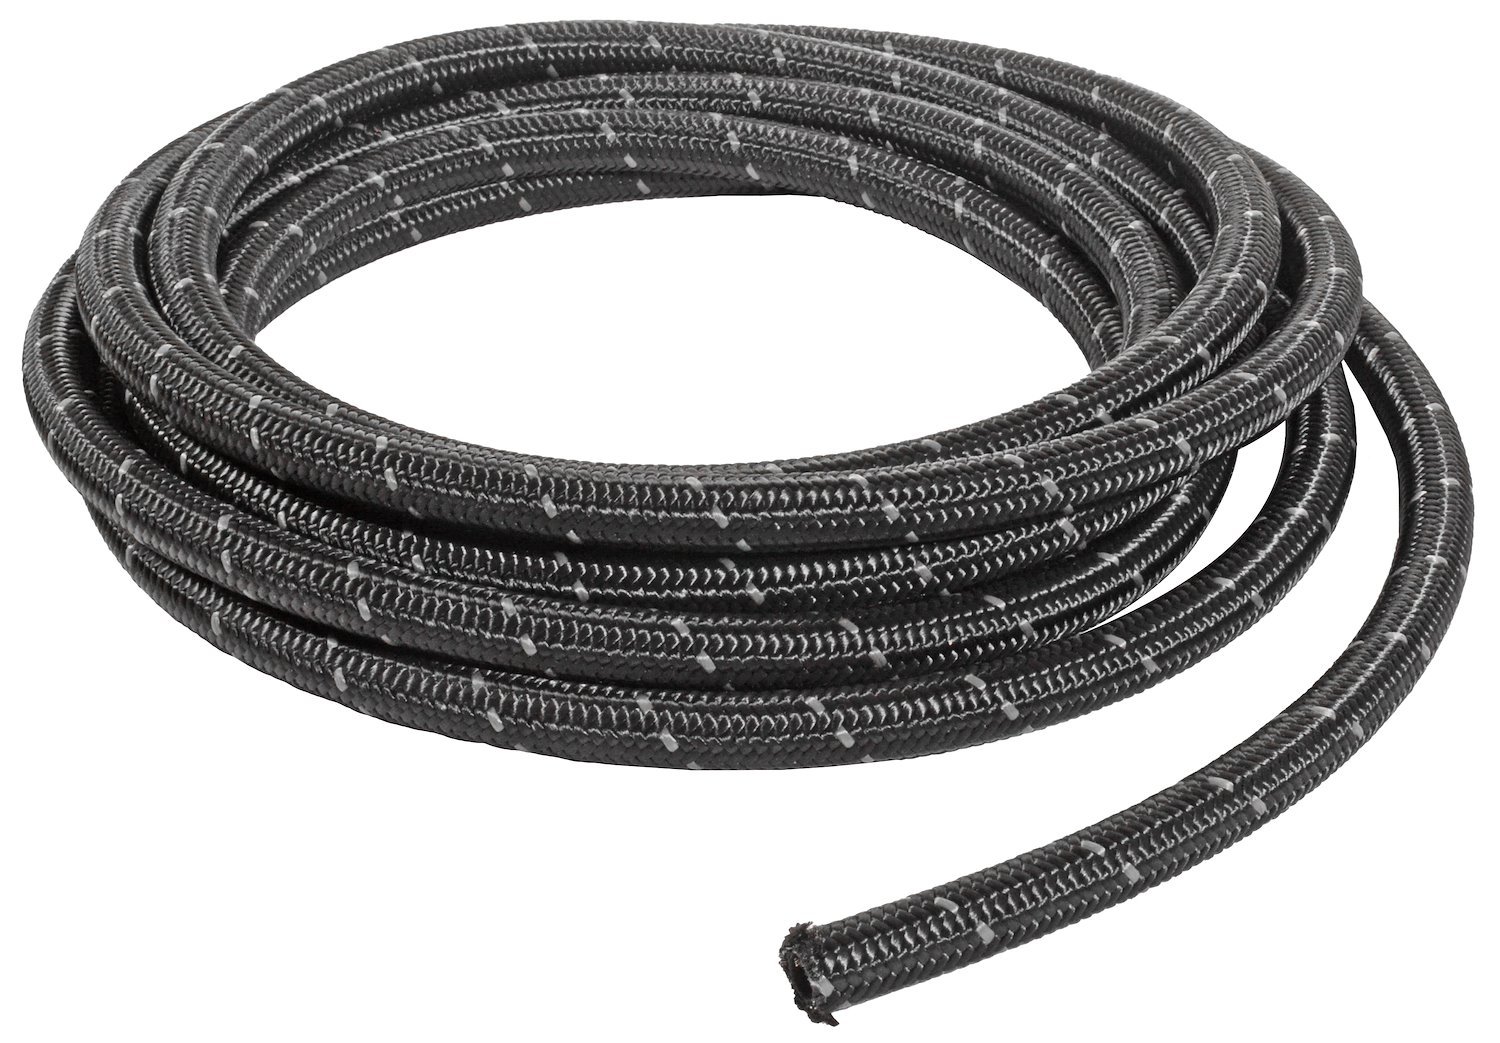 JEGS Fuel Hose - Pro-Flo Extreme 30R9 Braided Hose -8AN x 20 ft